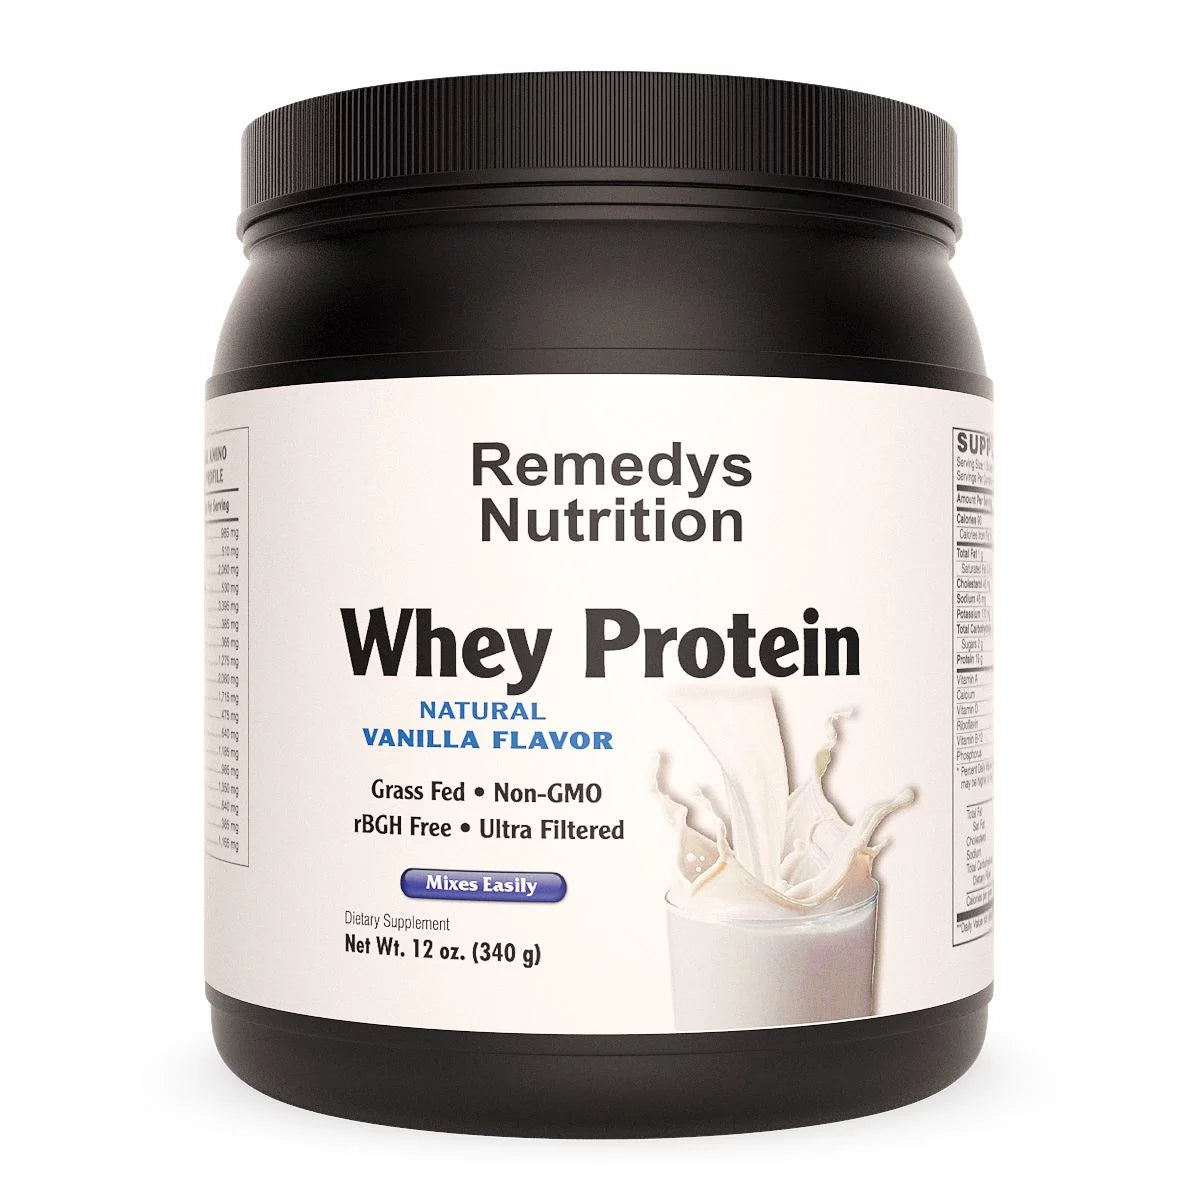 Image of Remedy's Nutrition® 12 oz Vanilla Whey Protein Powder Dietary Supplement front bottle. Made in the USA.